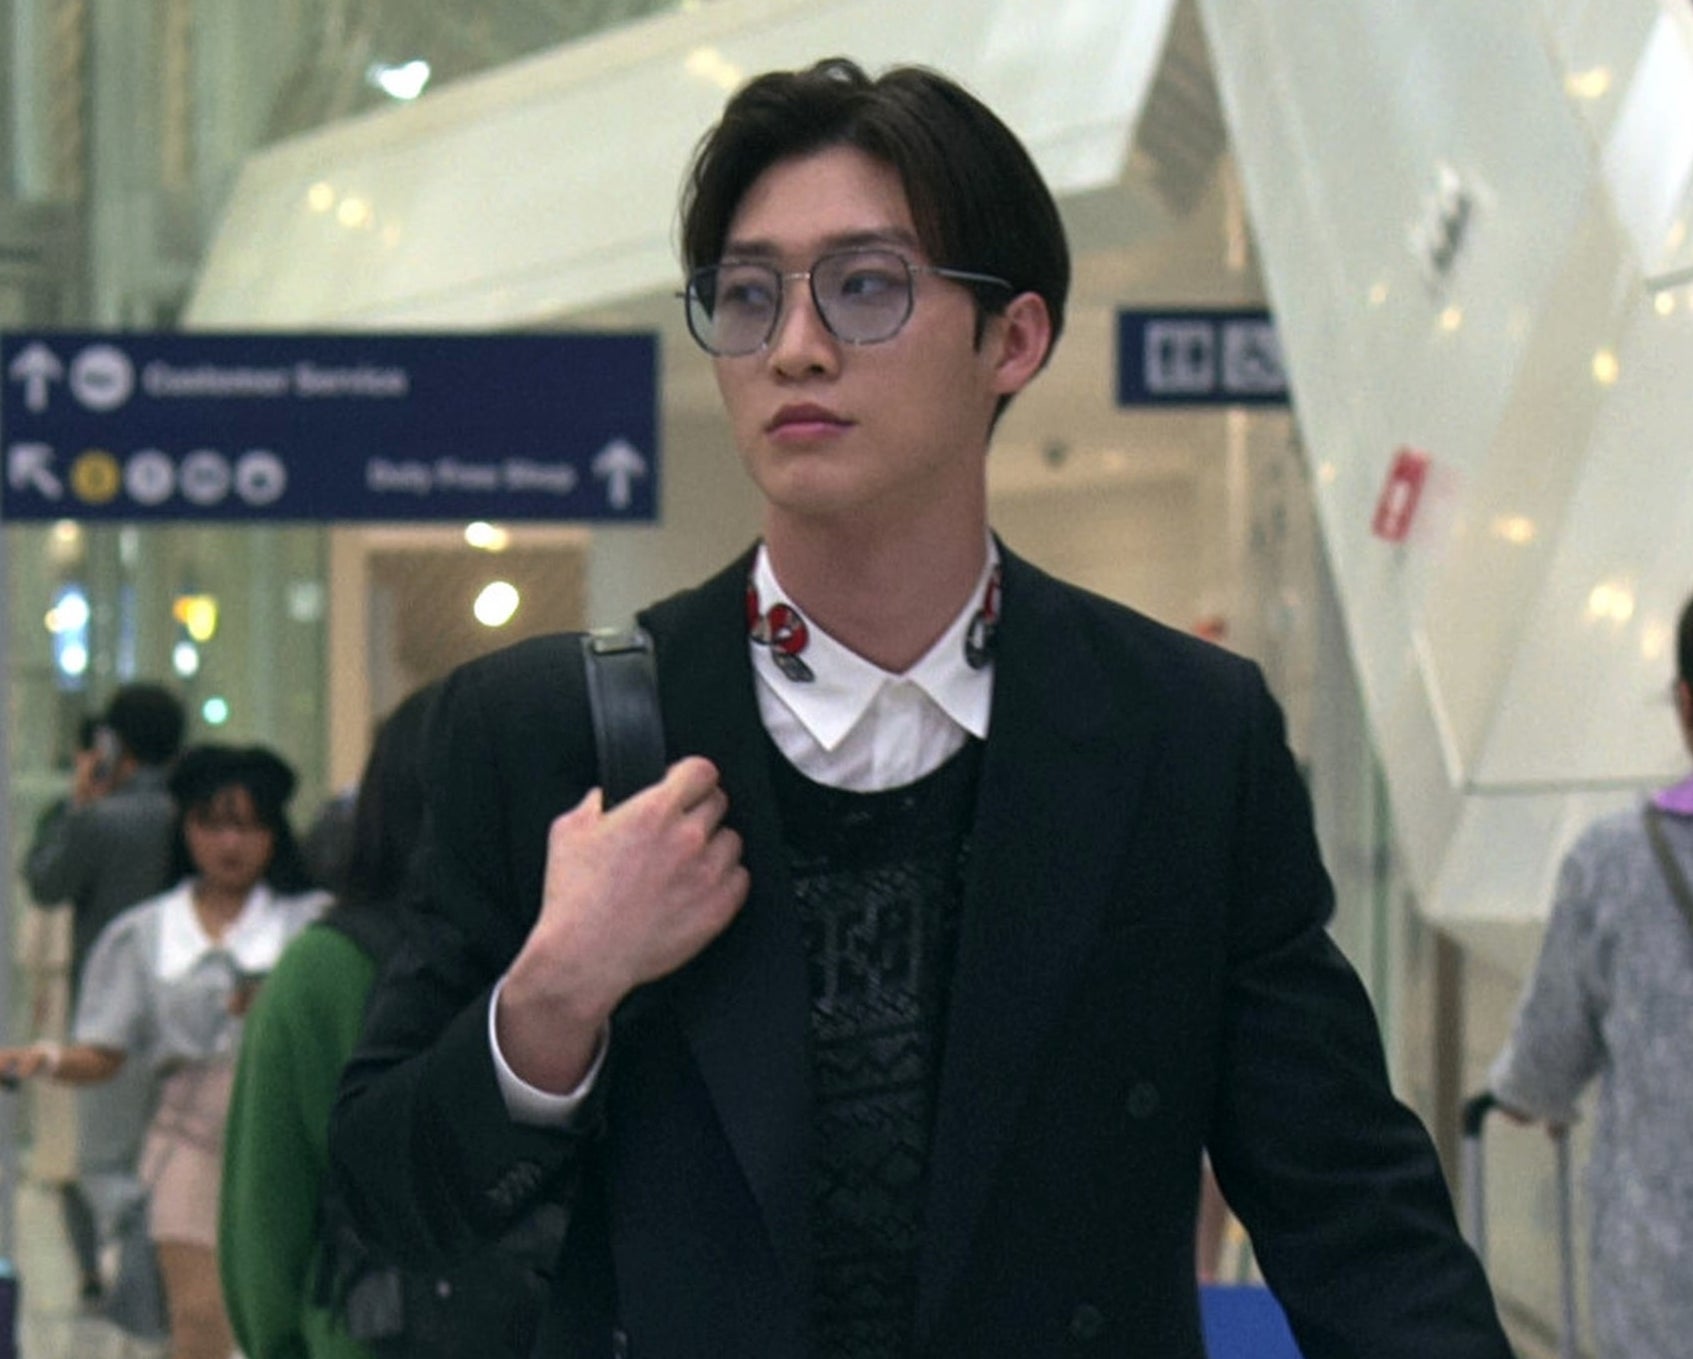 Man in a suit and glasses carrying a bag walks through an airport